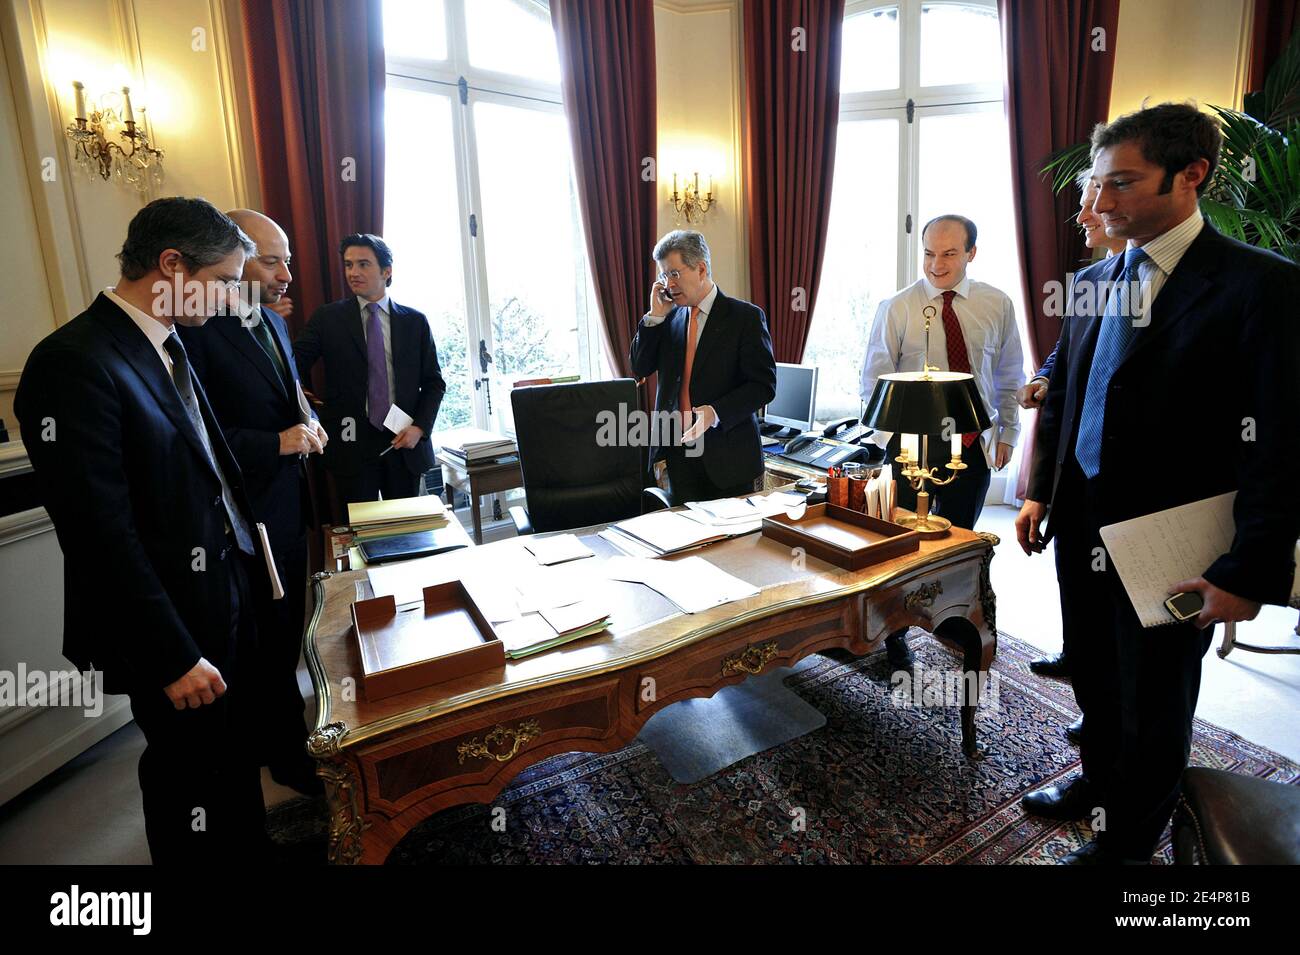 Jean-David Levitte, Diplomatic advisor of President Nicolas Sarkozy, is  pictured in his office at the Elysee Palace in Paris, France on January 22,  2008. Levitte has a meeting with his councillors :